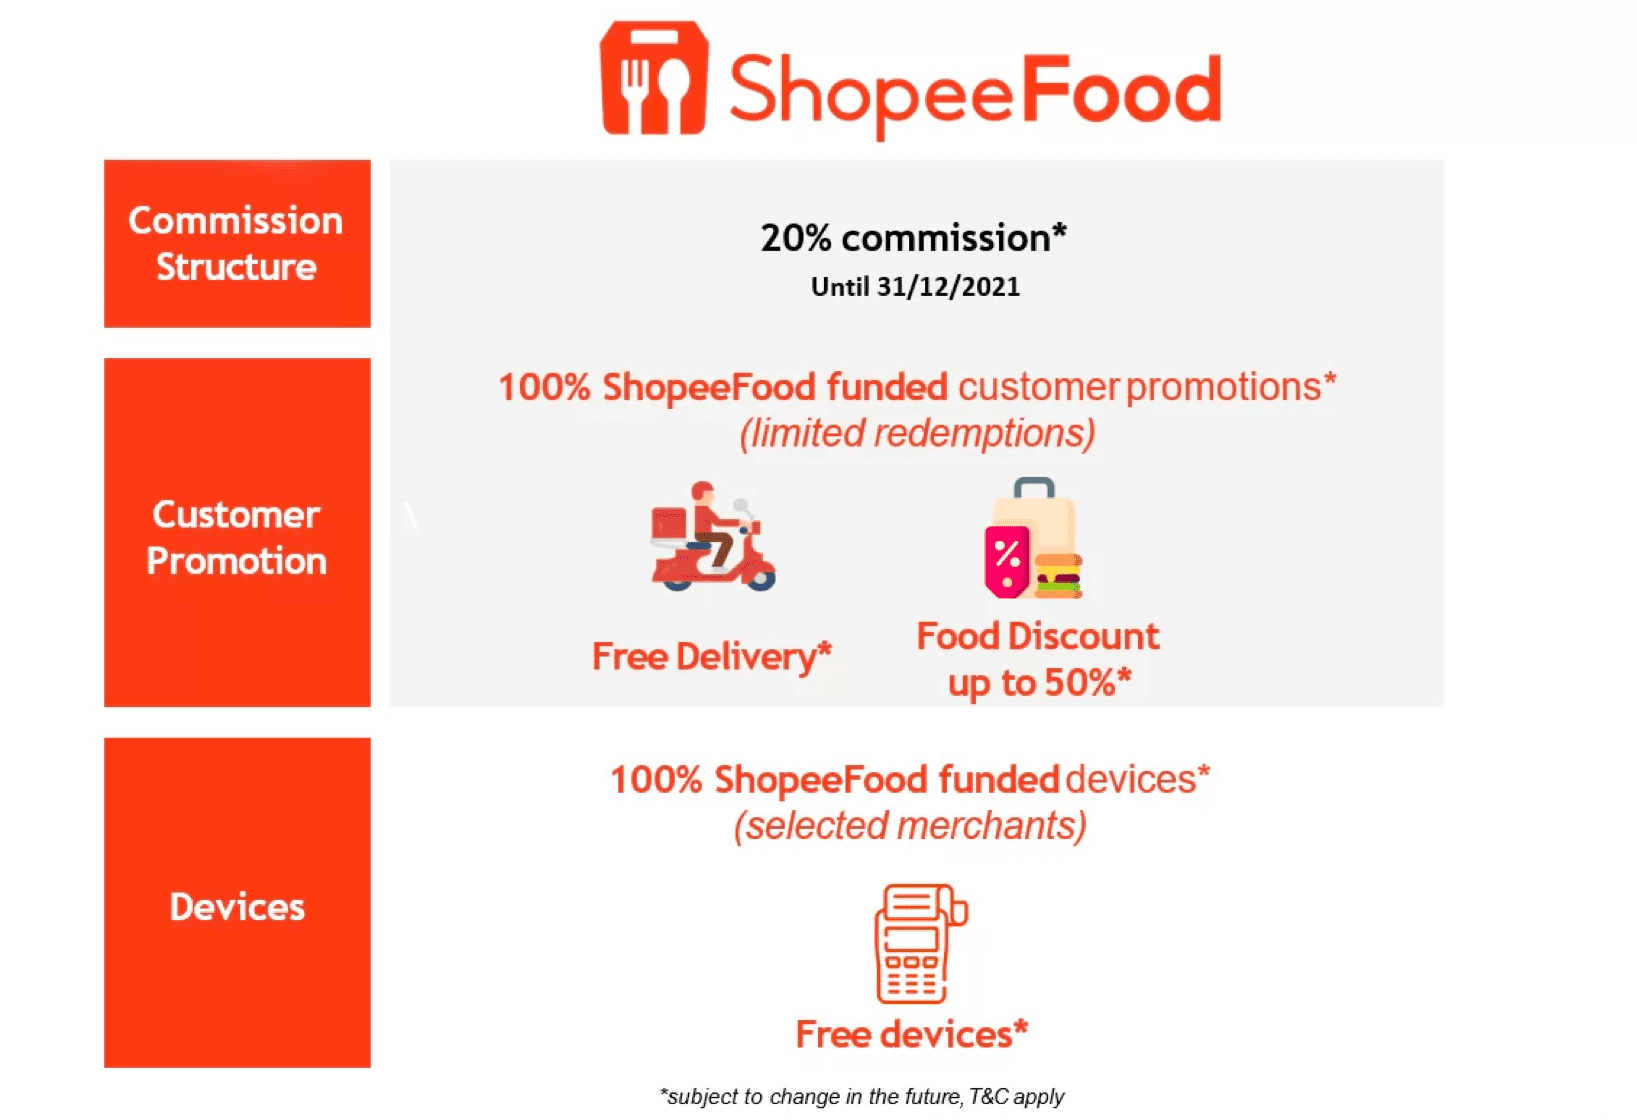 Shopee food delivery